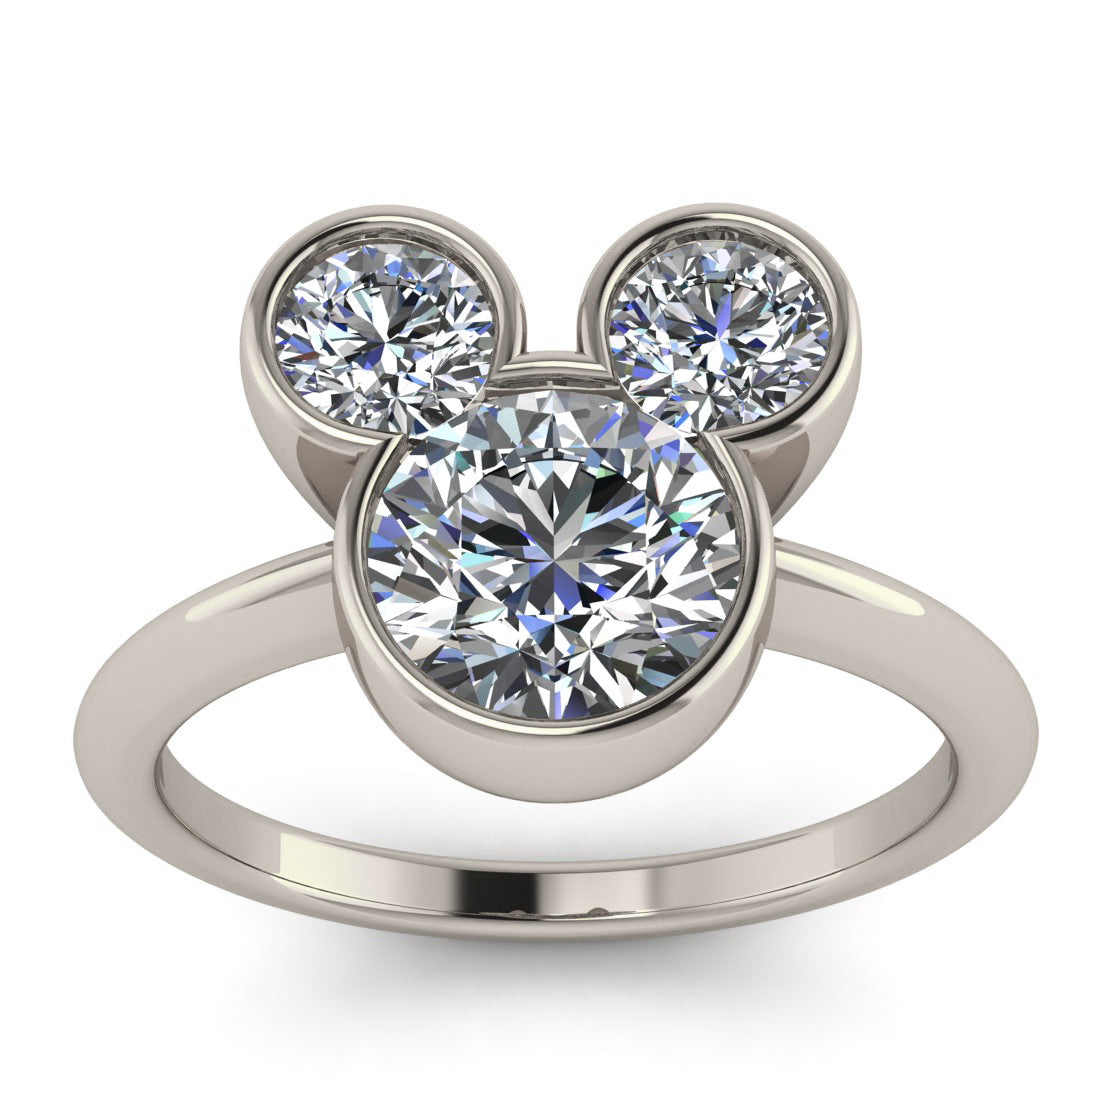 Mouse Ears Magically Inspired Engagement Ring - Mouse Ears Magic Solitaire